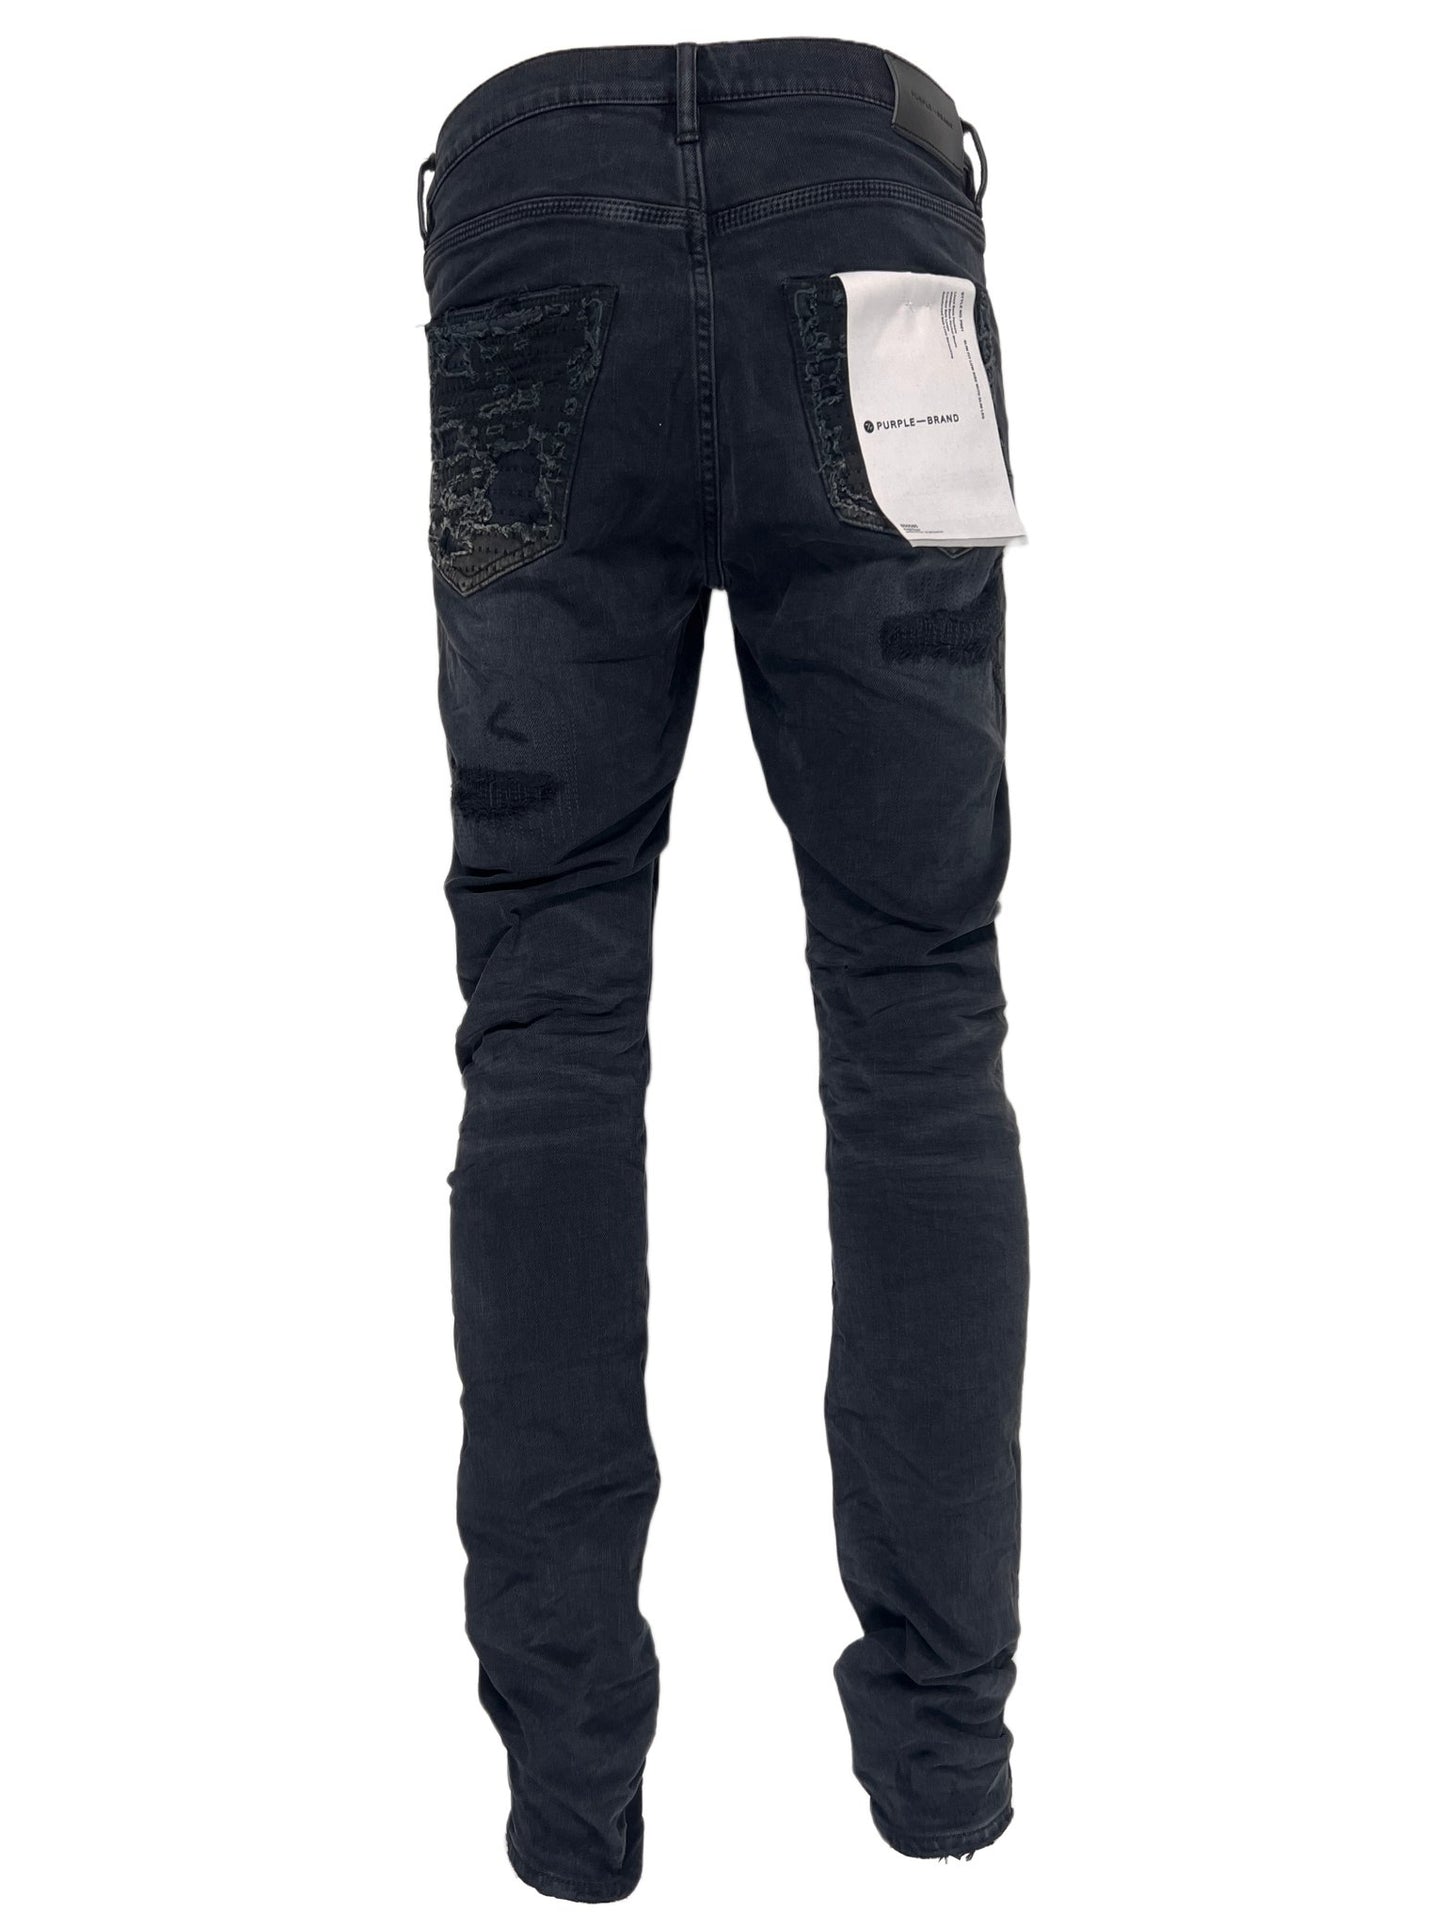 A pair of black PURPLE BRAND JEANS P001-BQDP with a quilted pocket on the back.